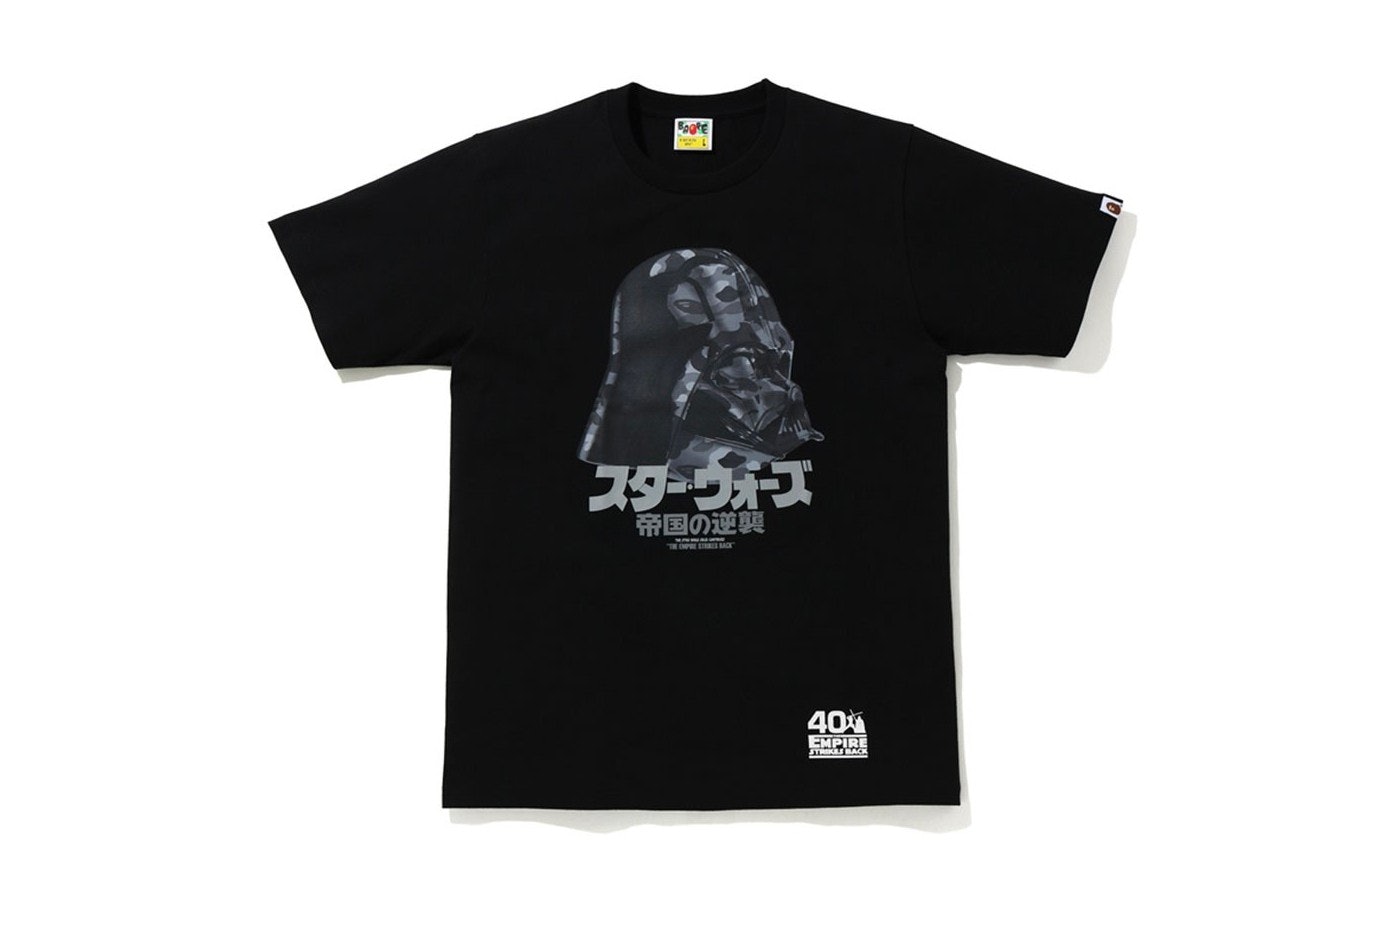 Bape is dropping a mean Darth Vader shirt to mark 40 years of 'The